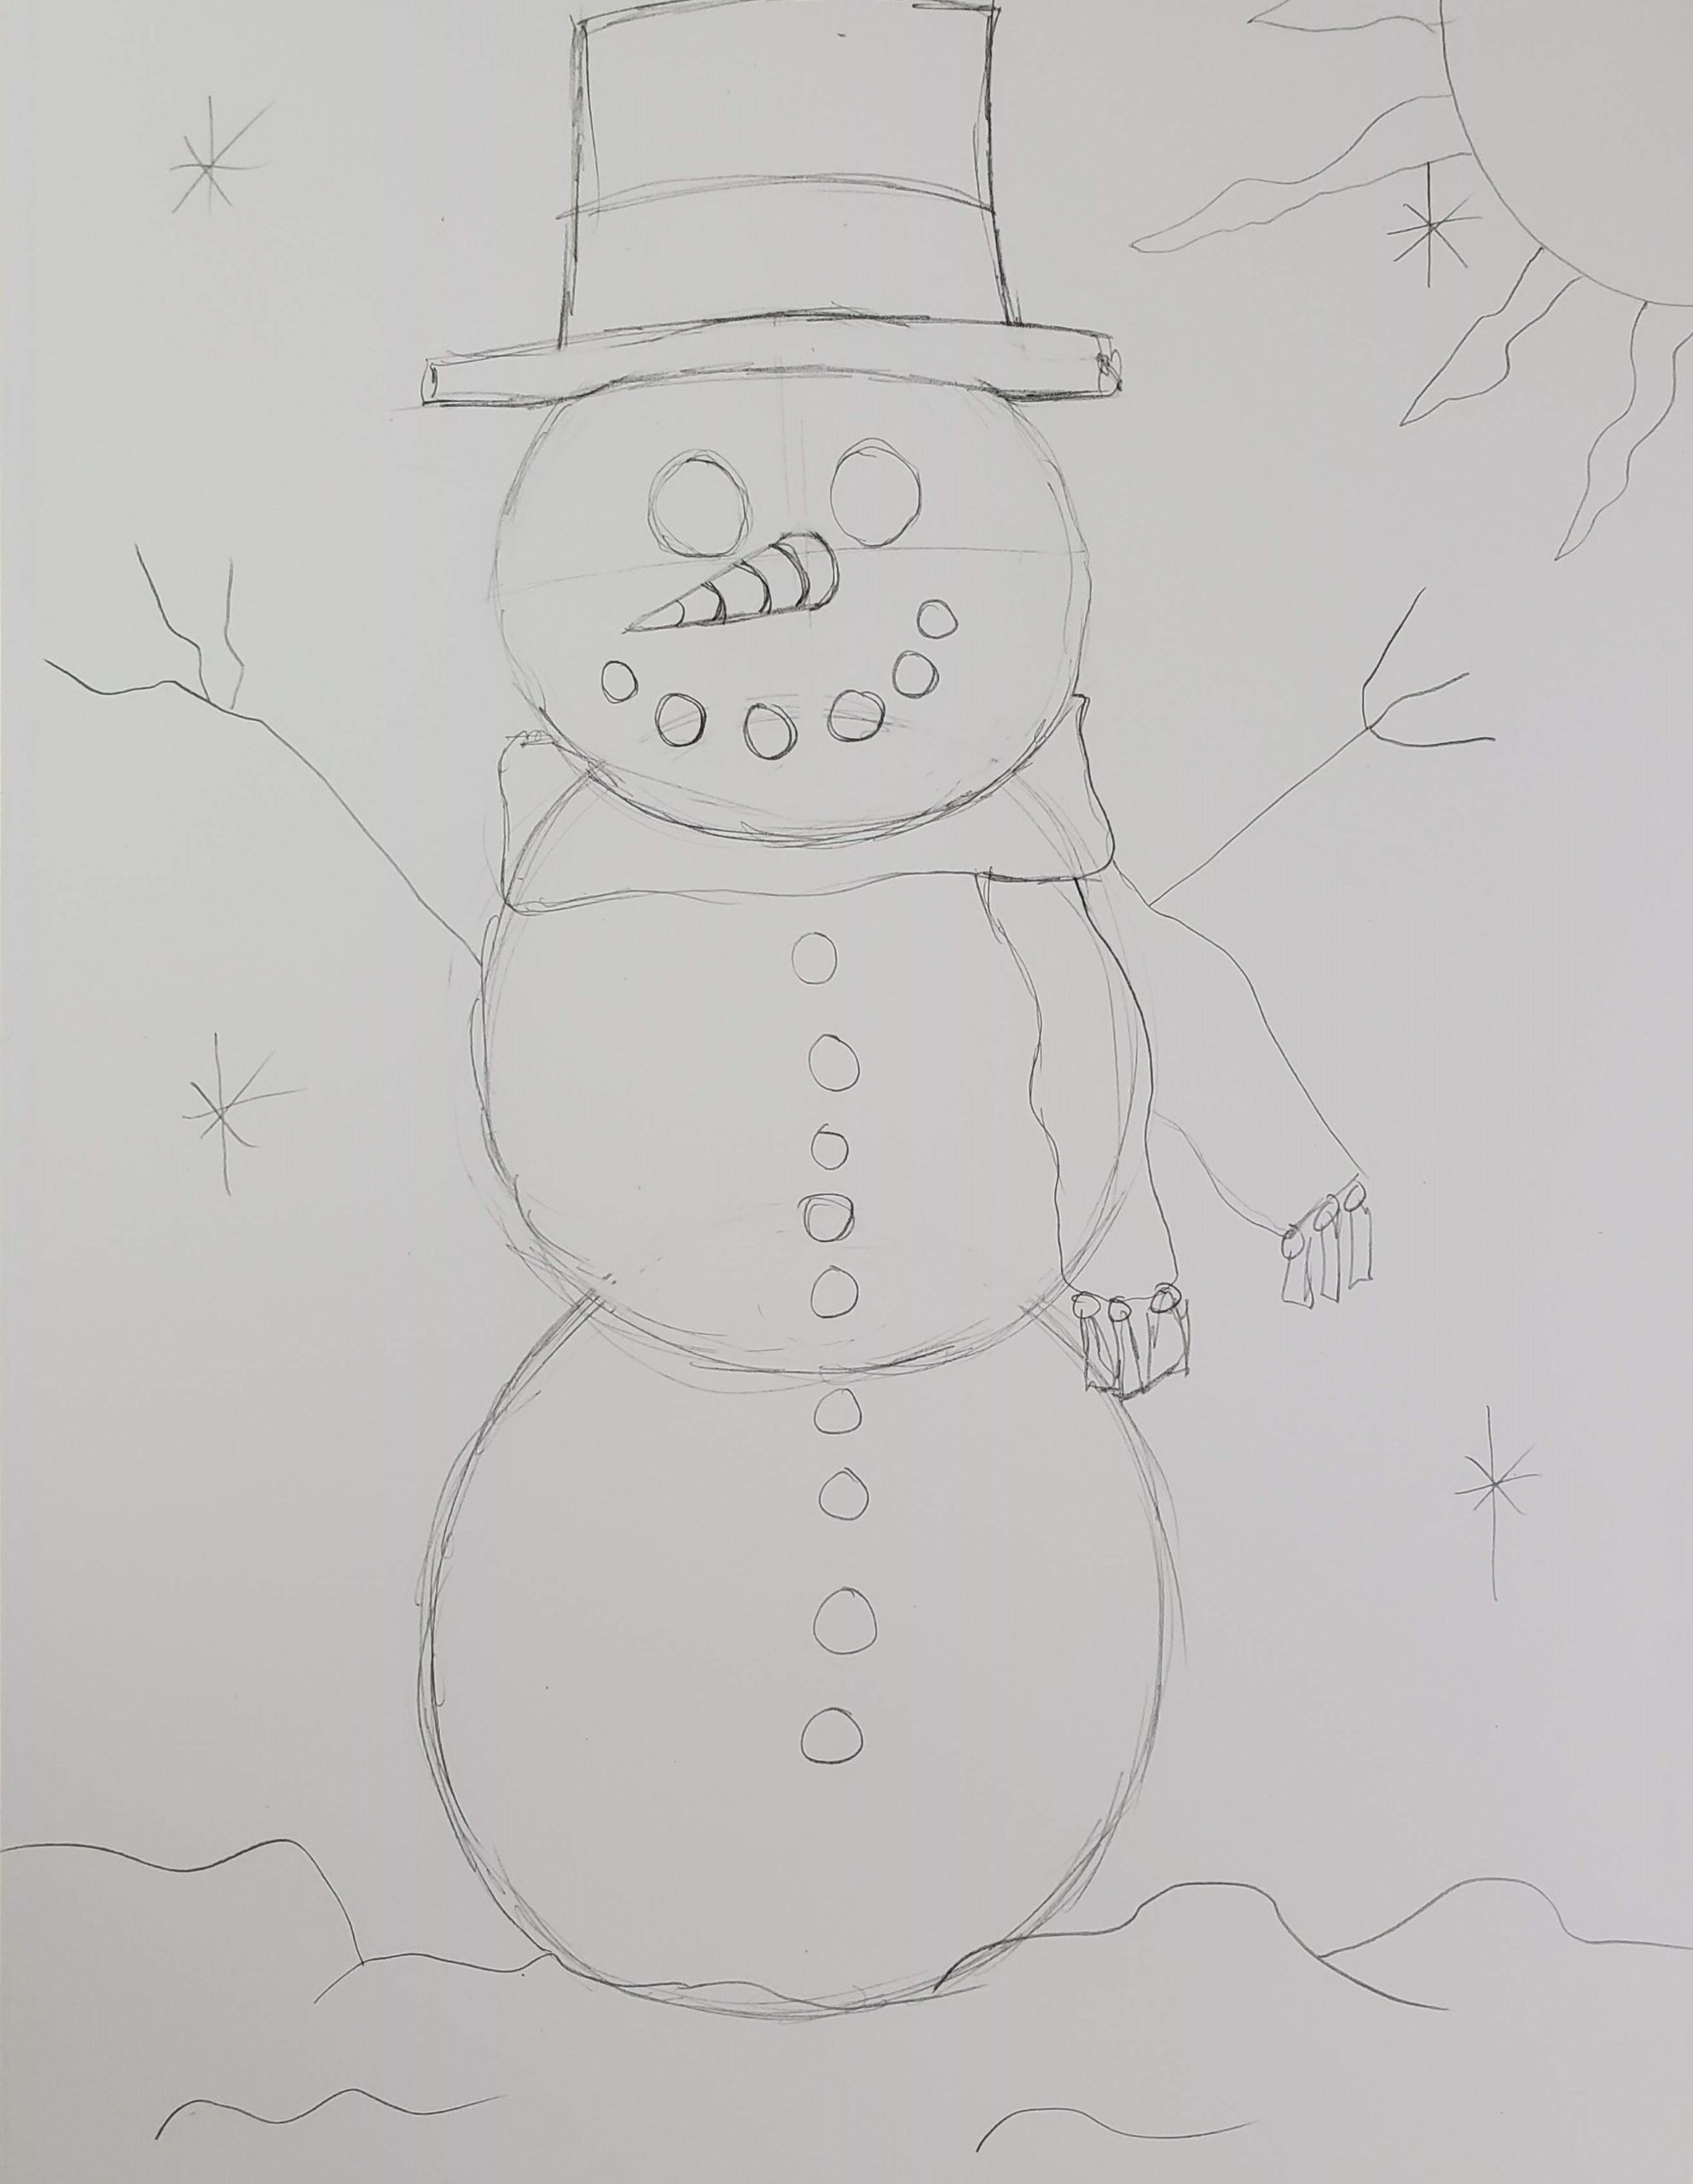 How to Draw a Snowman, Easy Drawing for Kids / Merry Christmas - YouTube